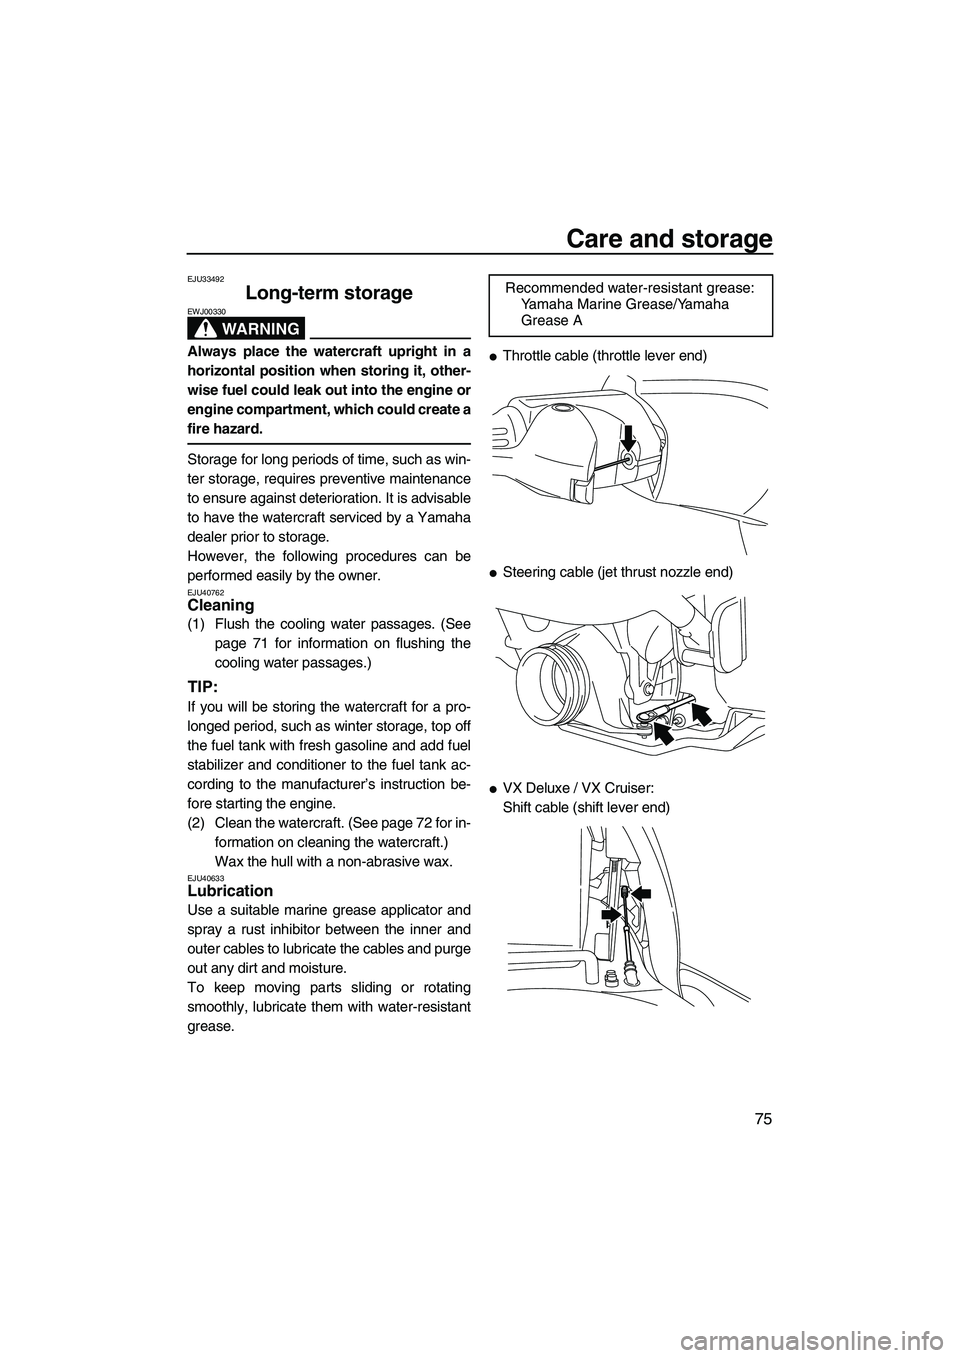 YAMAHA VX SPORT 2013  Owners Manual Care and storage
75
EJU33492
Long-term storage 
WARNING
EWJ00330
Always place the watercraft upright in a
horizontal position when storing it, other-
wise fuel could leak out into the engine or
engine